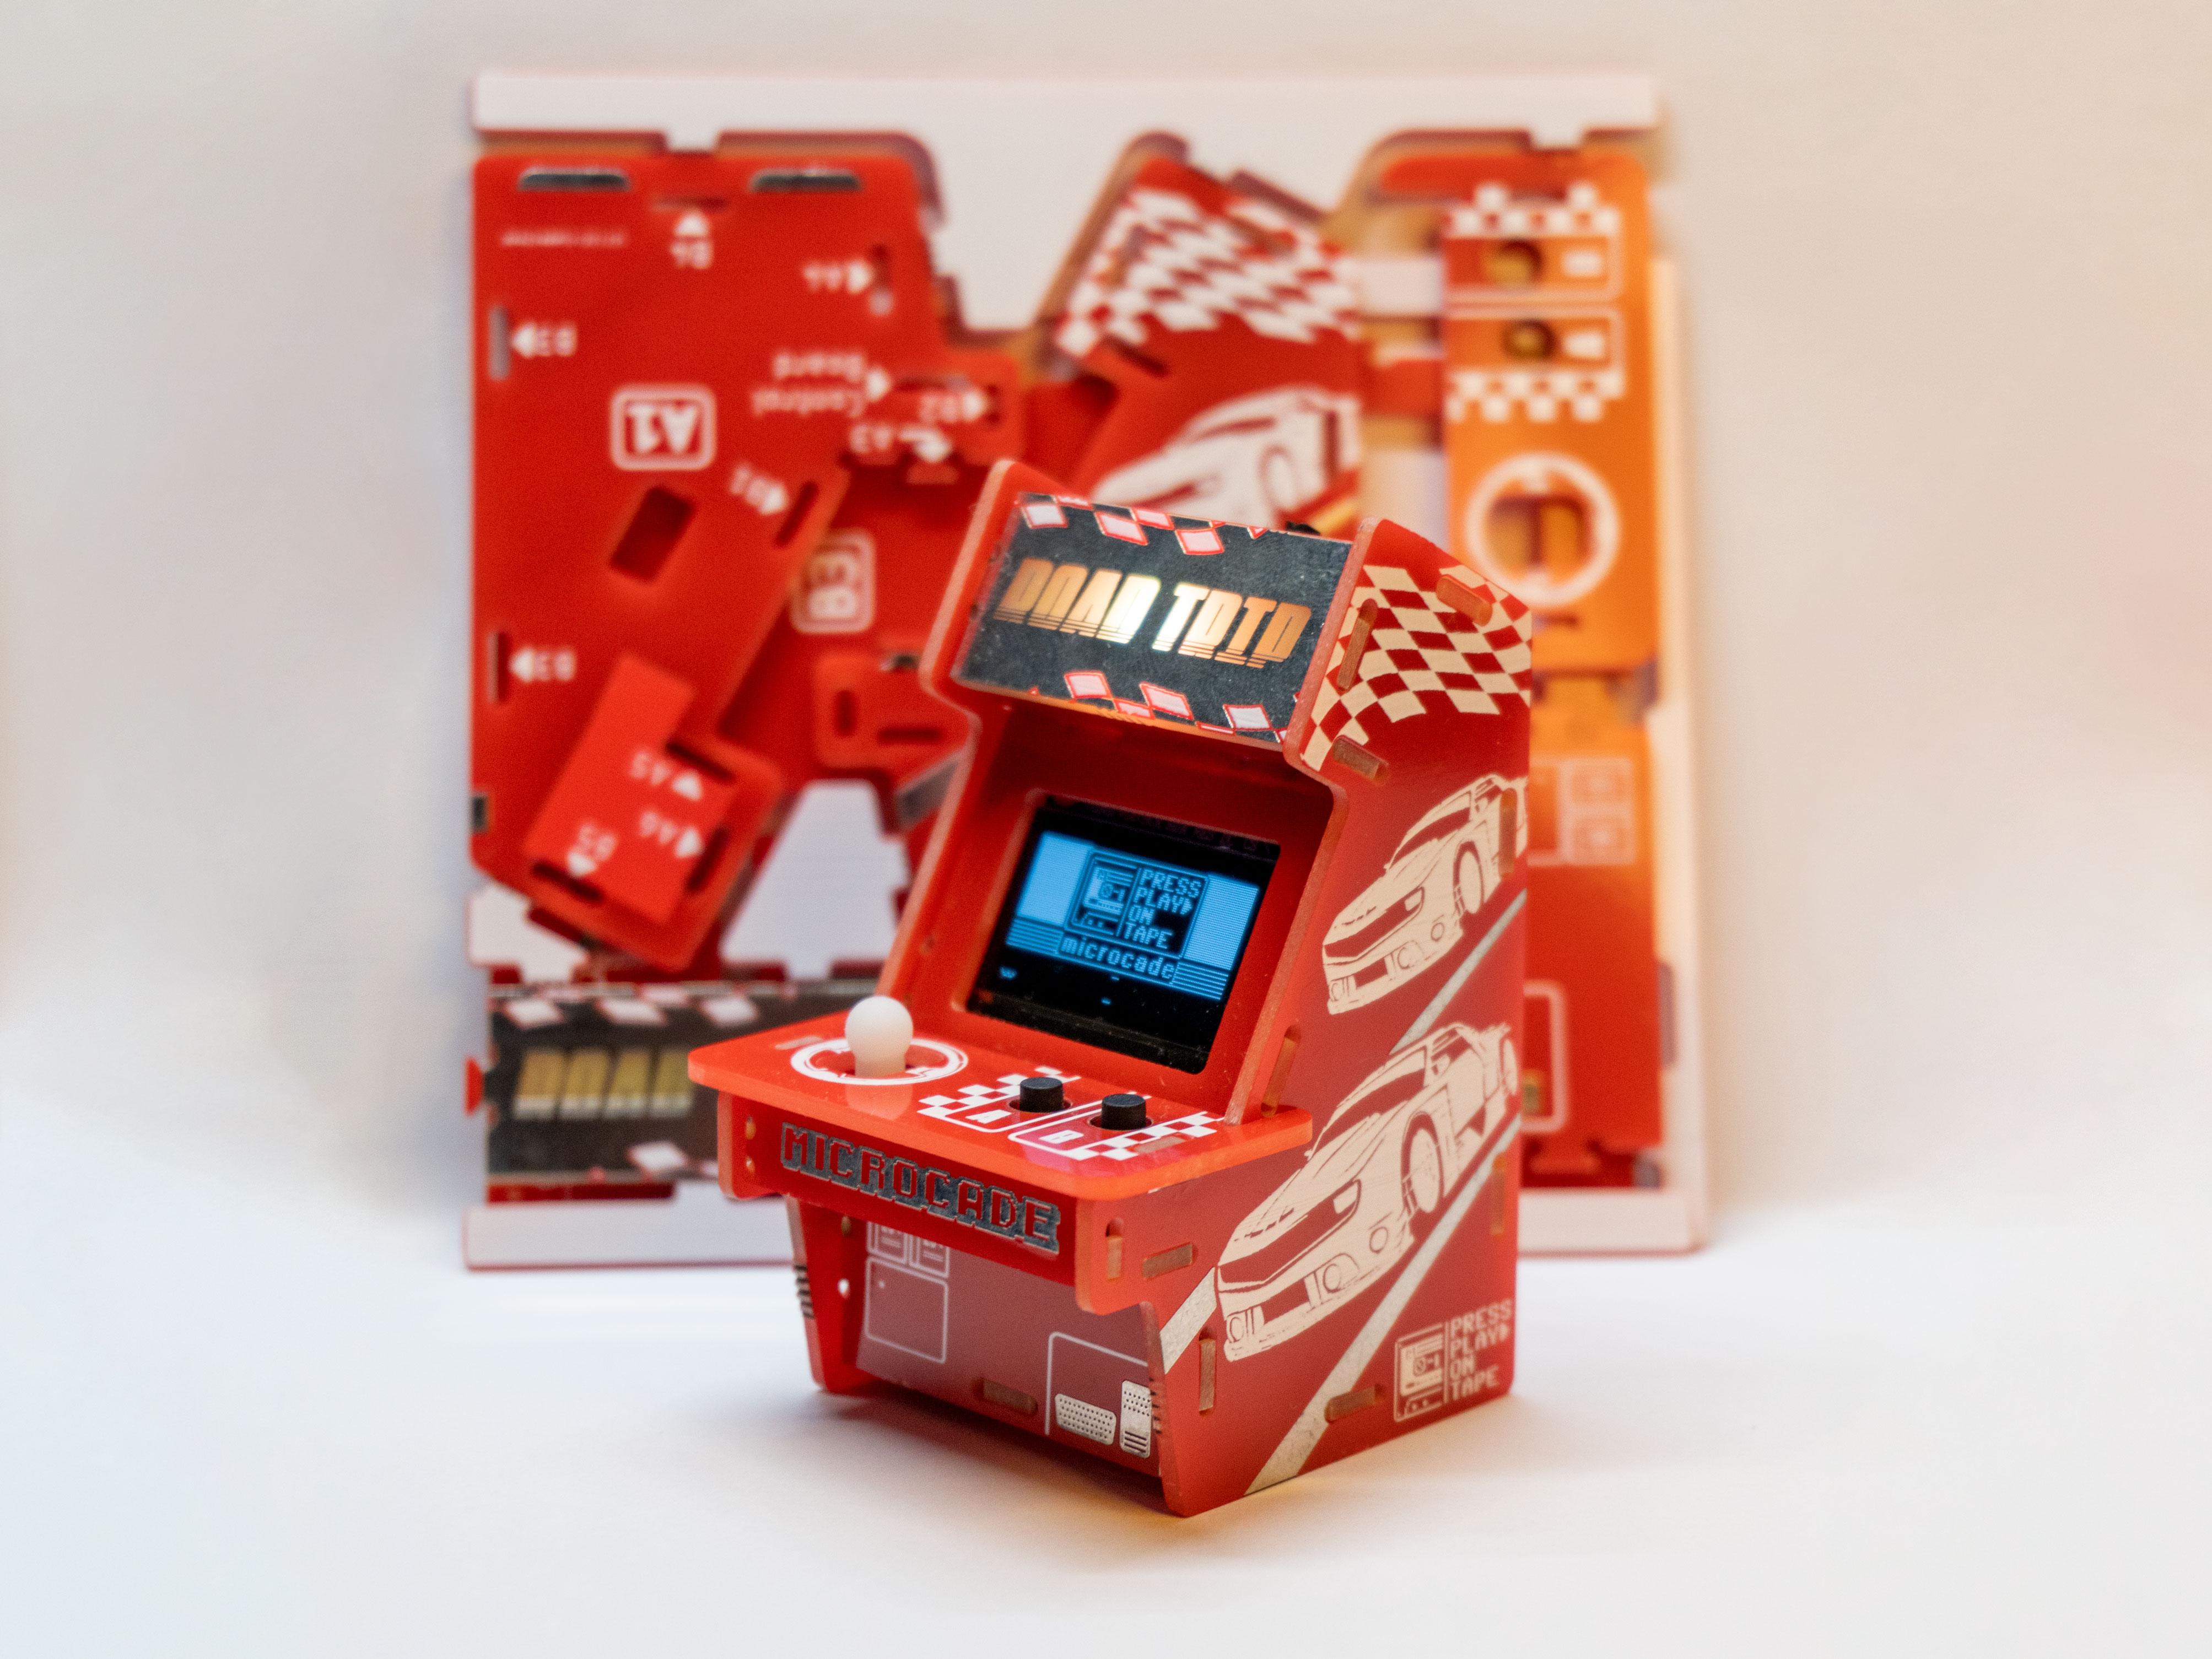 Microcade: Palm sized fully PCB arcade machine for STEM